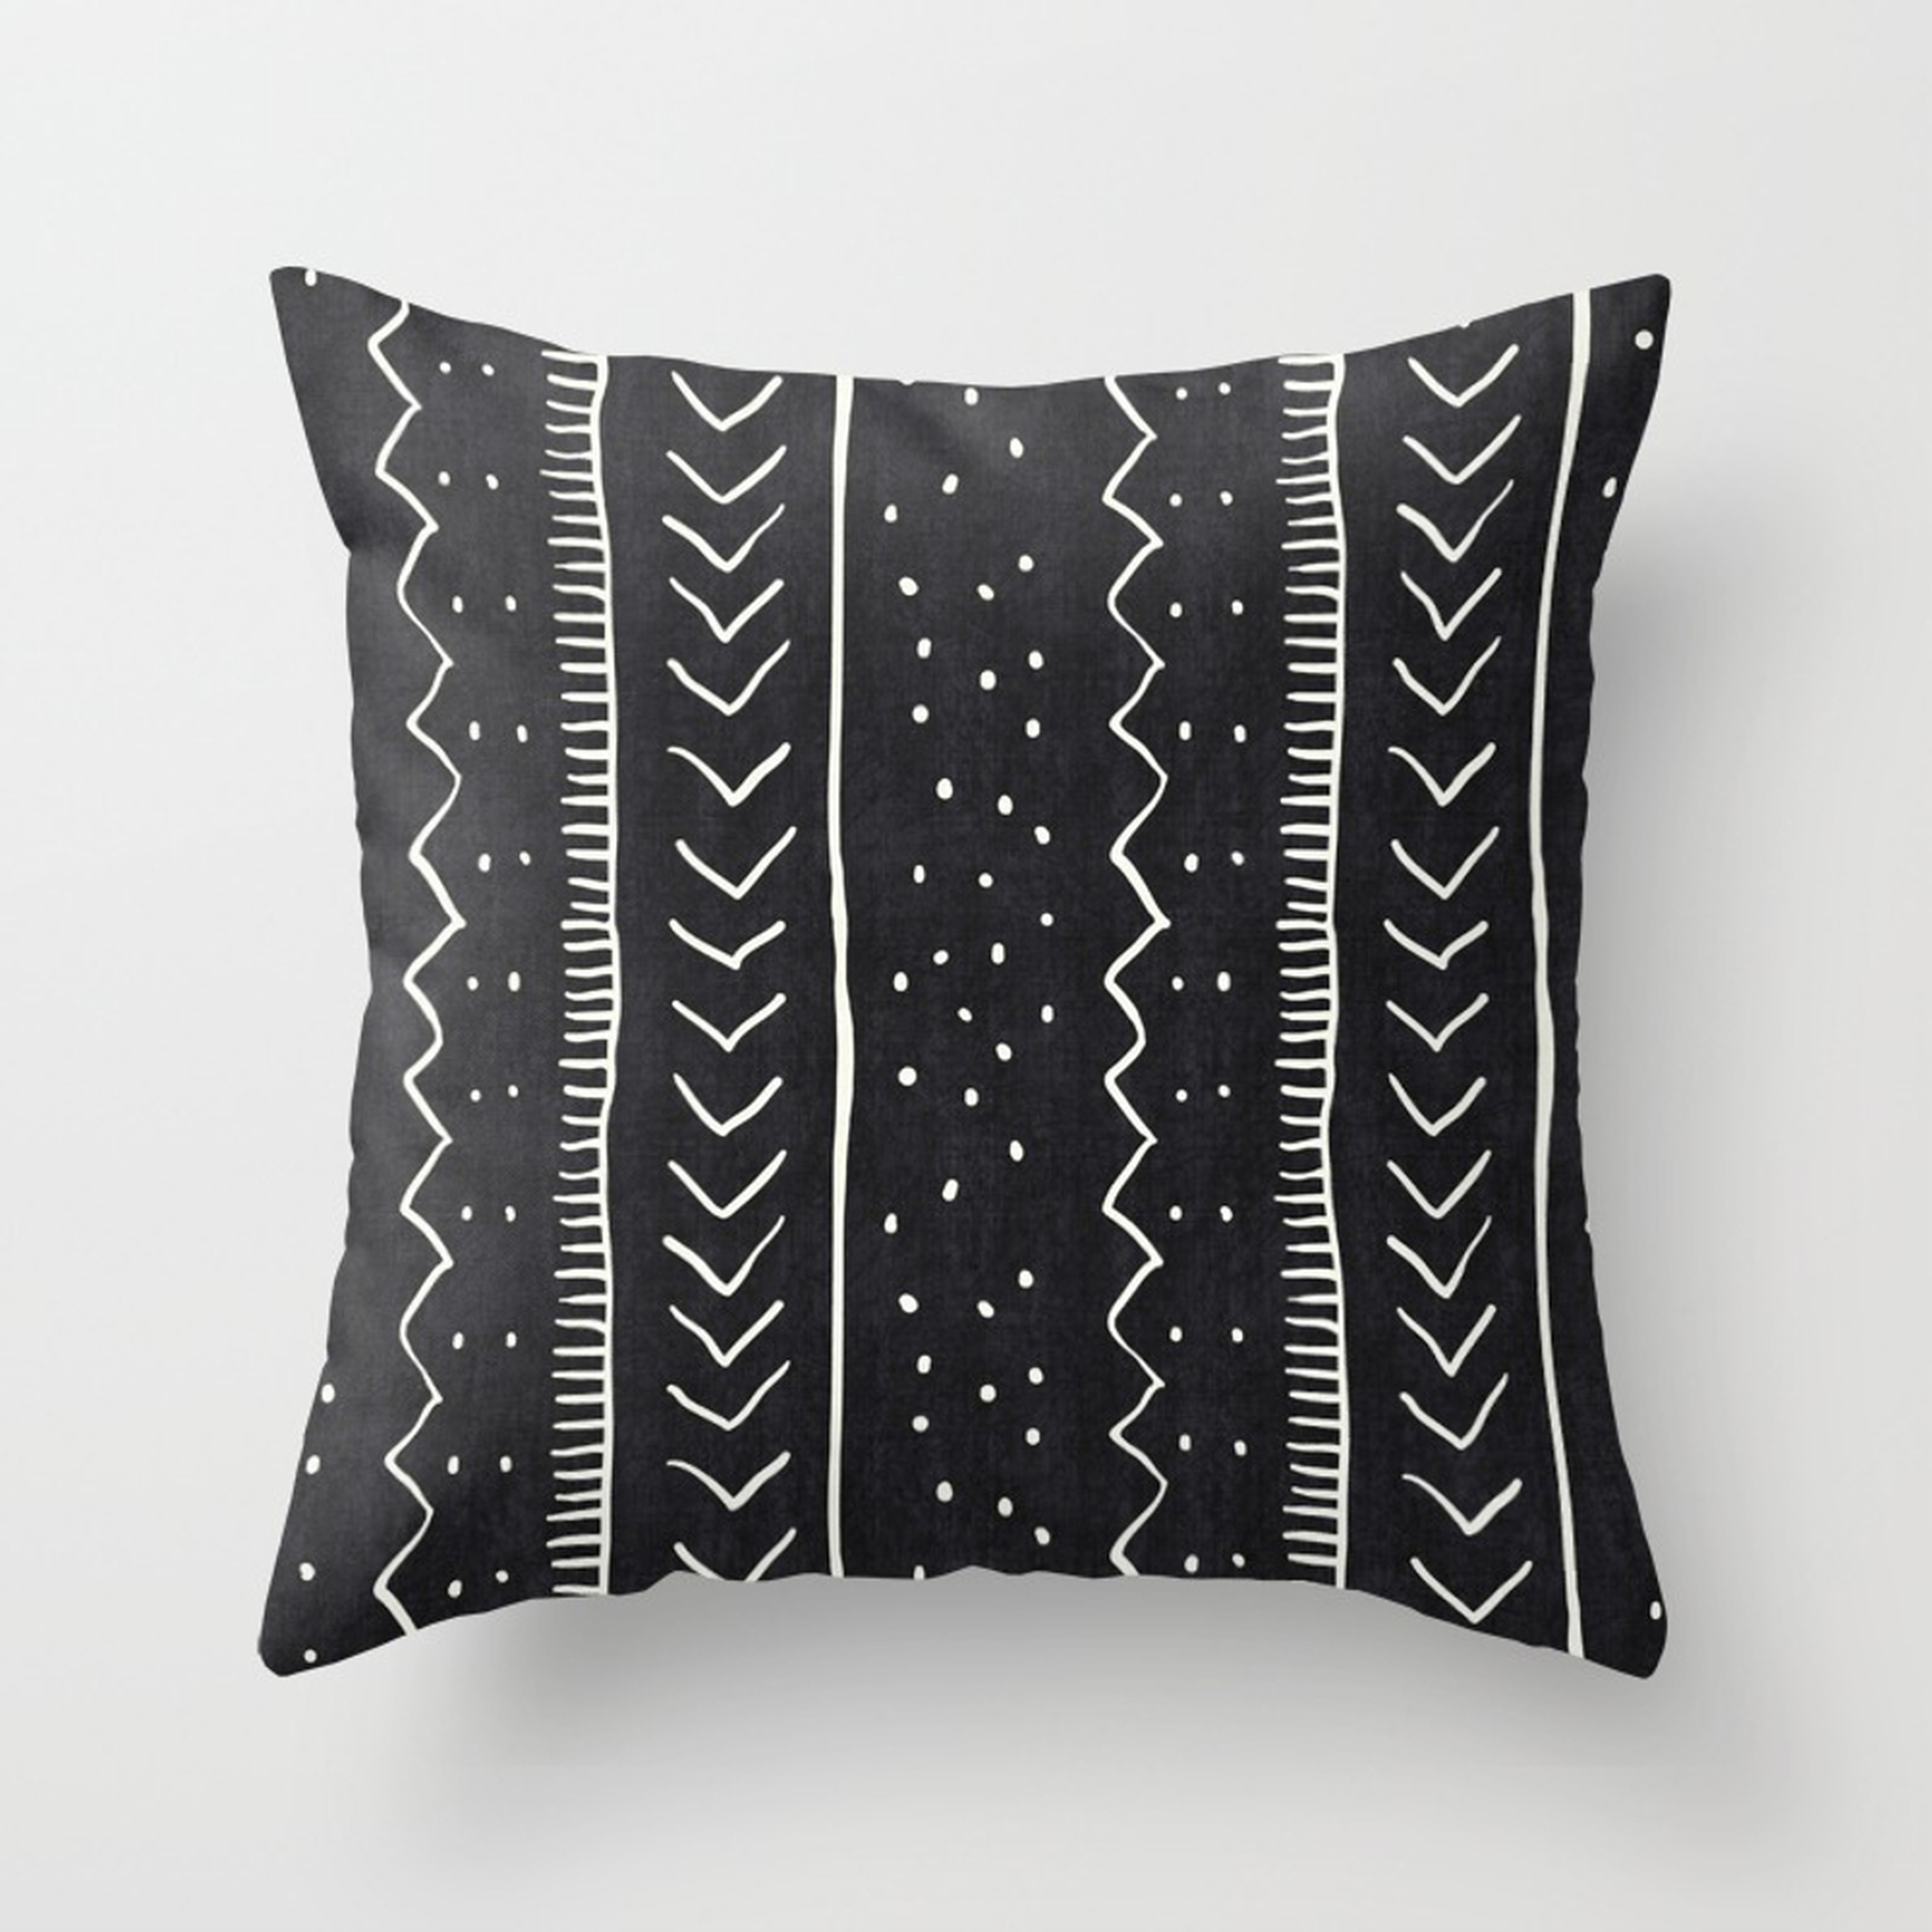 Cute Geometric Stripe In Black And White Throw Pillow by House Of Haha - Cover (20" x 20") With Pillow Insert - Indoor Pillow - Society6